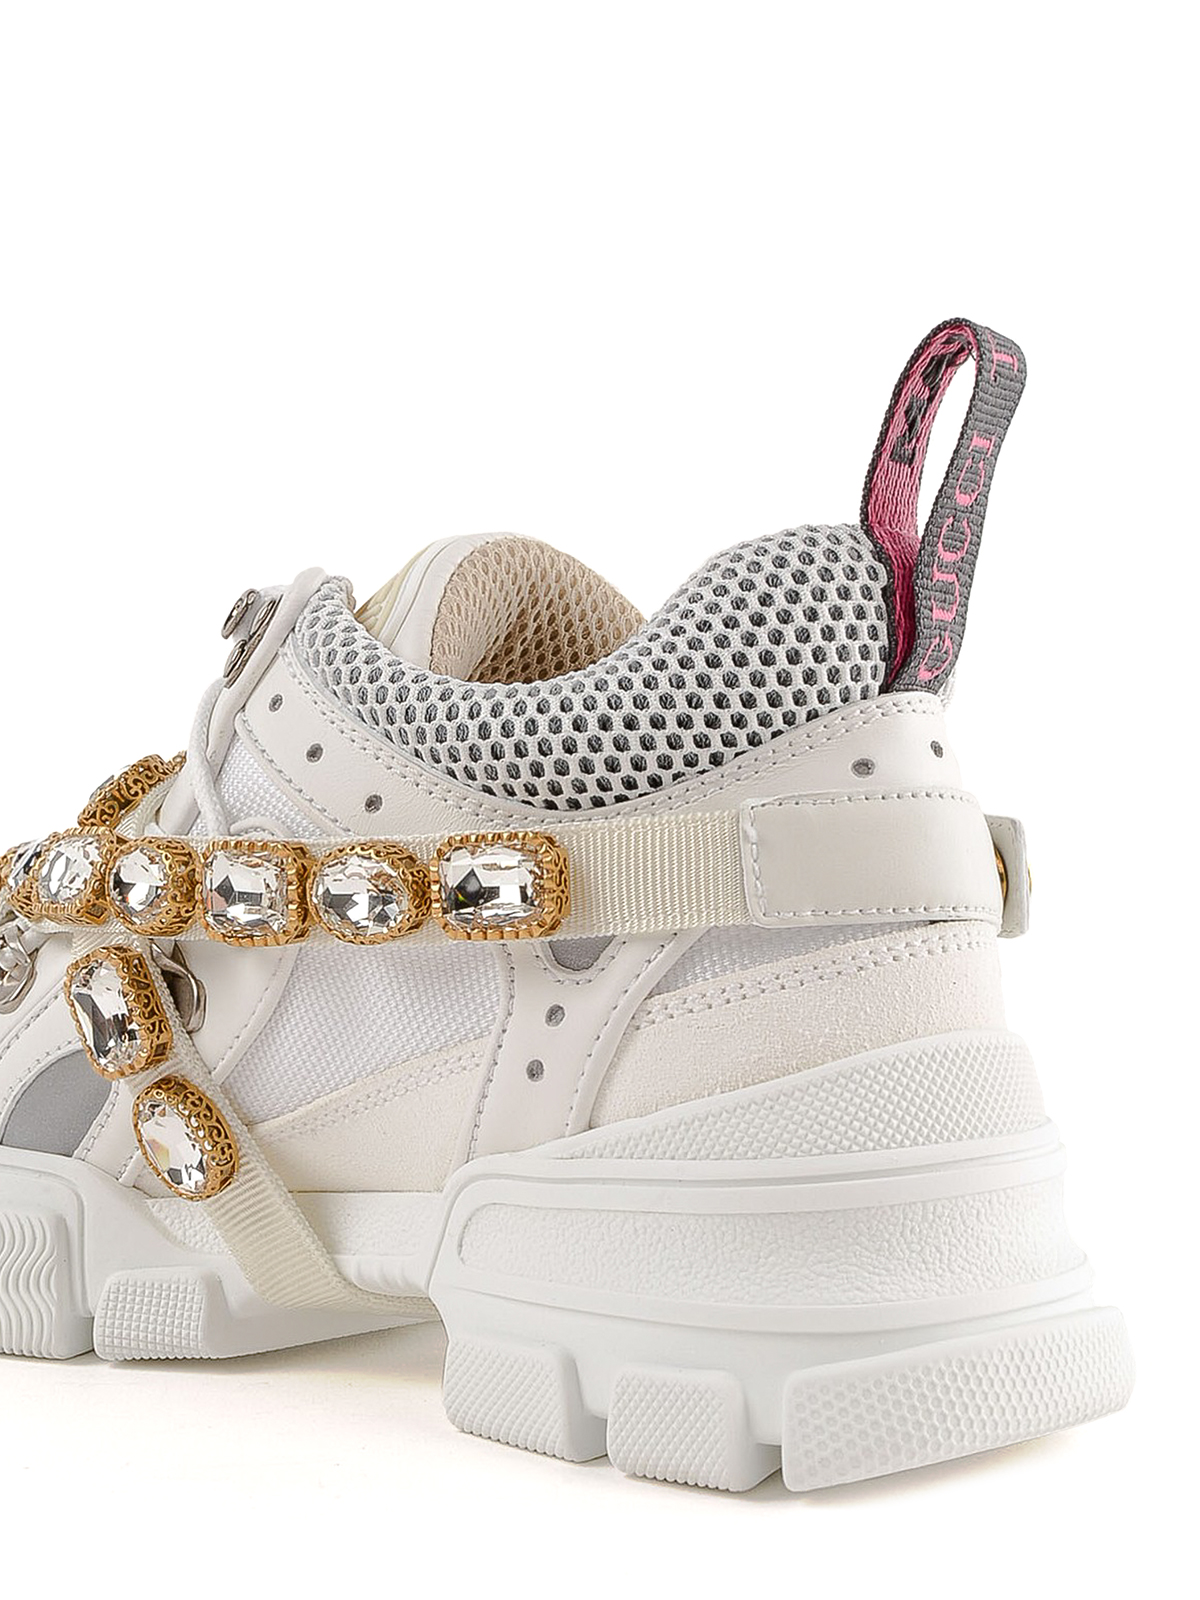 gucci removable crystals